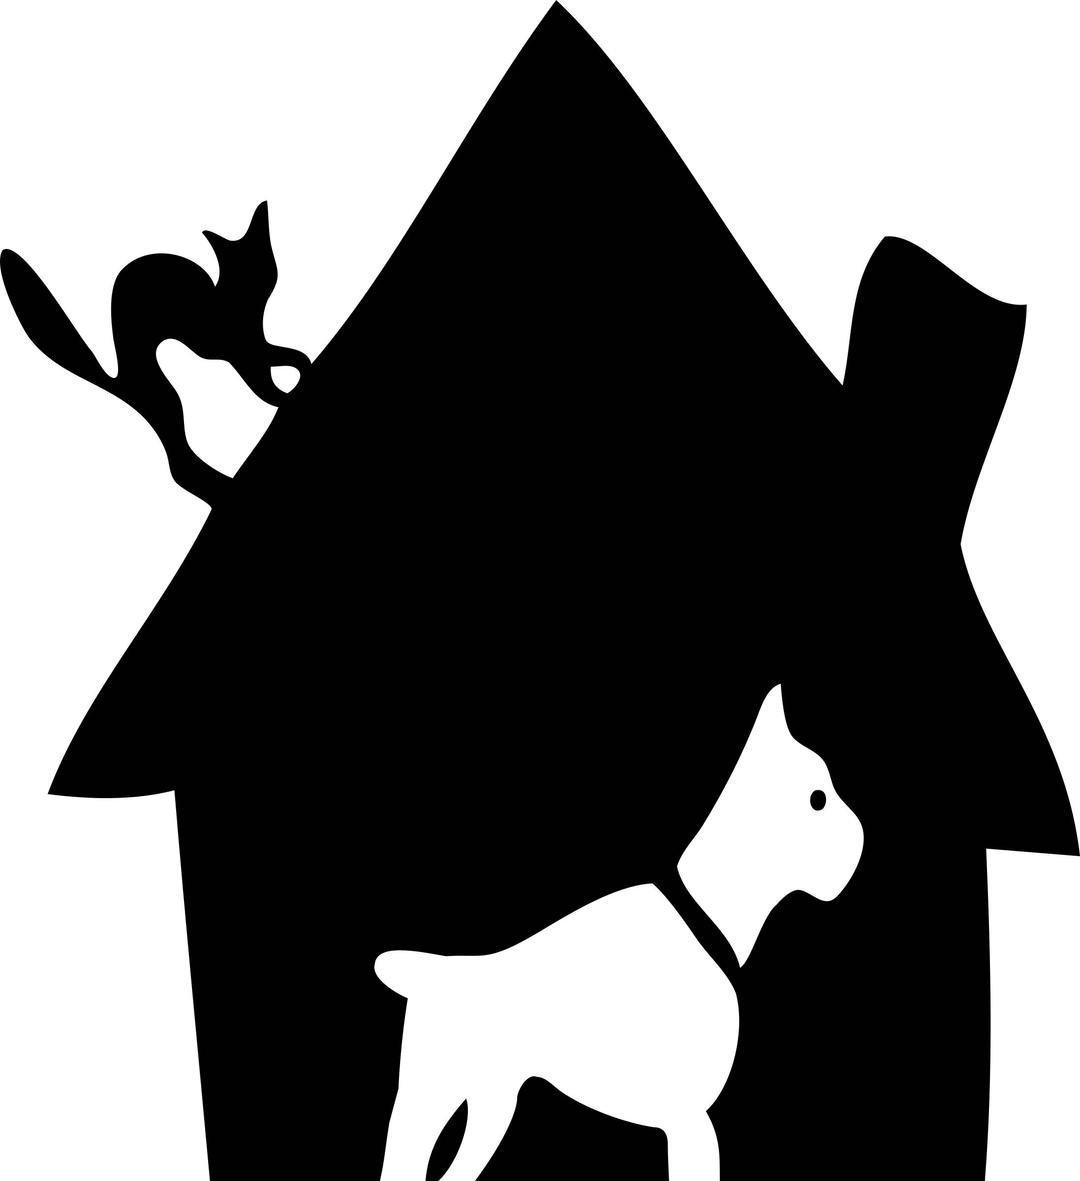 Black House with Dog and Cat cleaned up png transparent